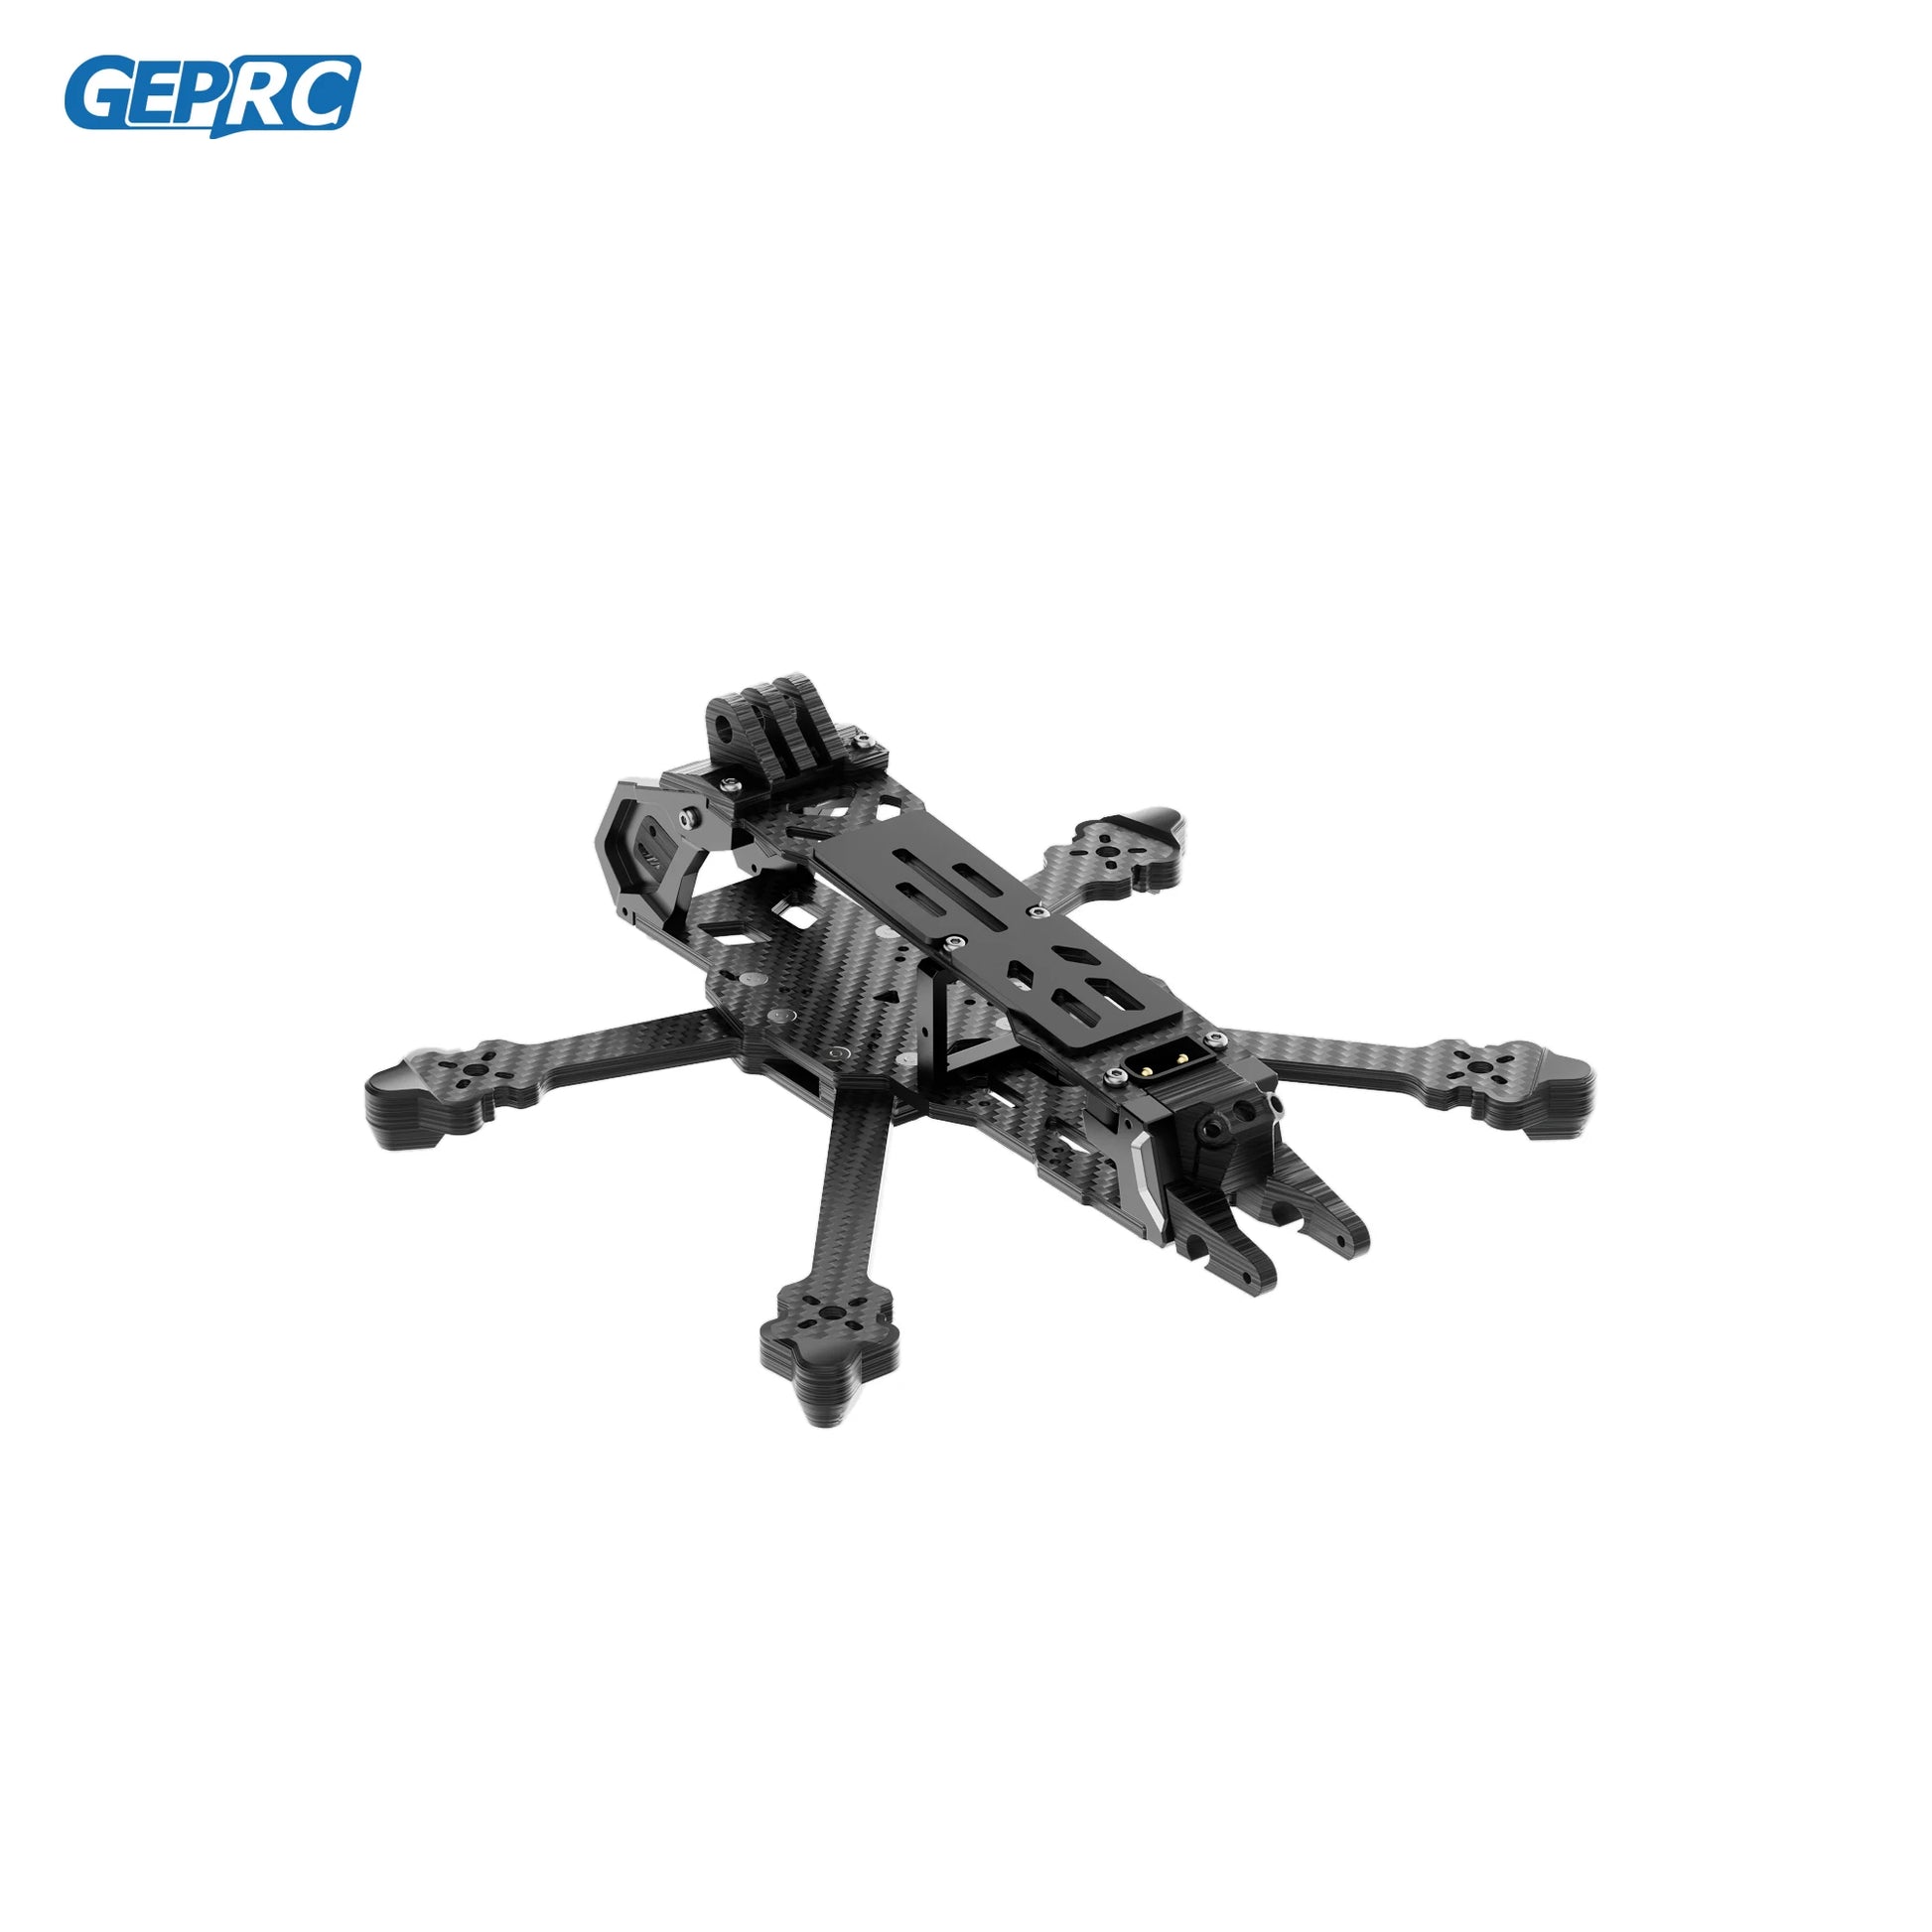 GEPRC GEP-DoMain3.6 / DoMain4.2 Frame Parts - Suitable  Replacement Repair Part for RC DIY FPV Freestyle Drone